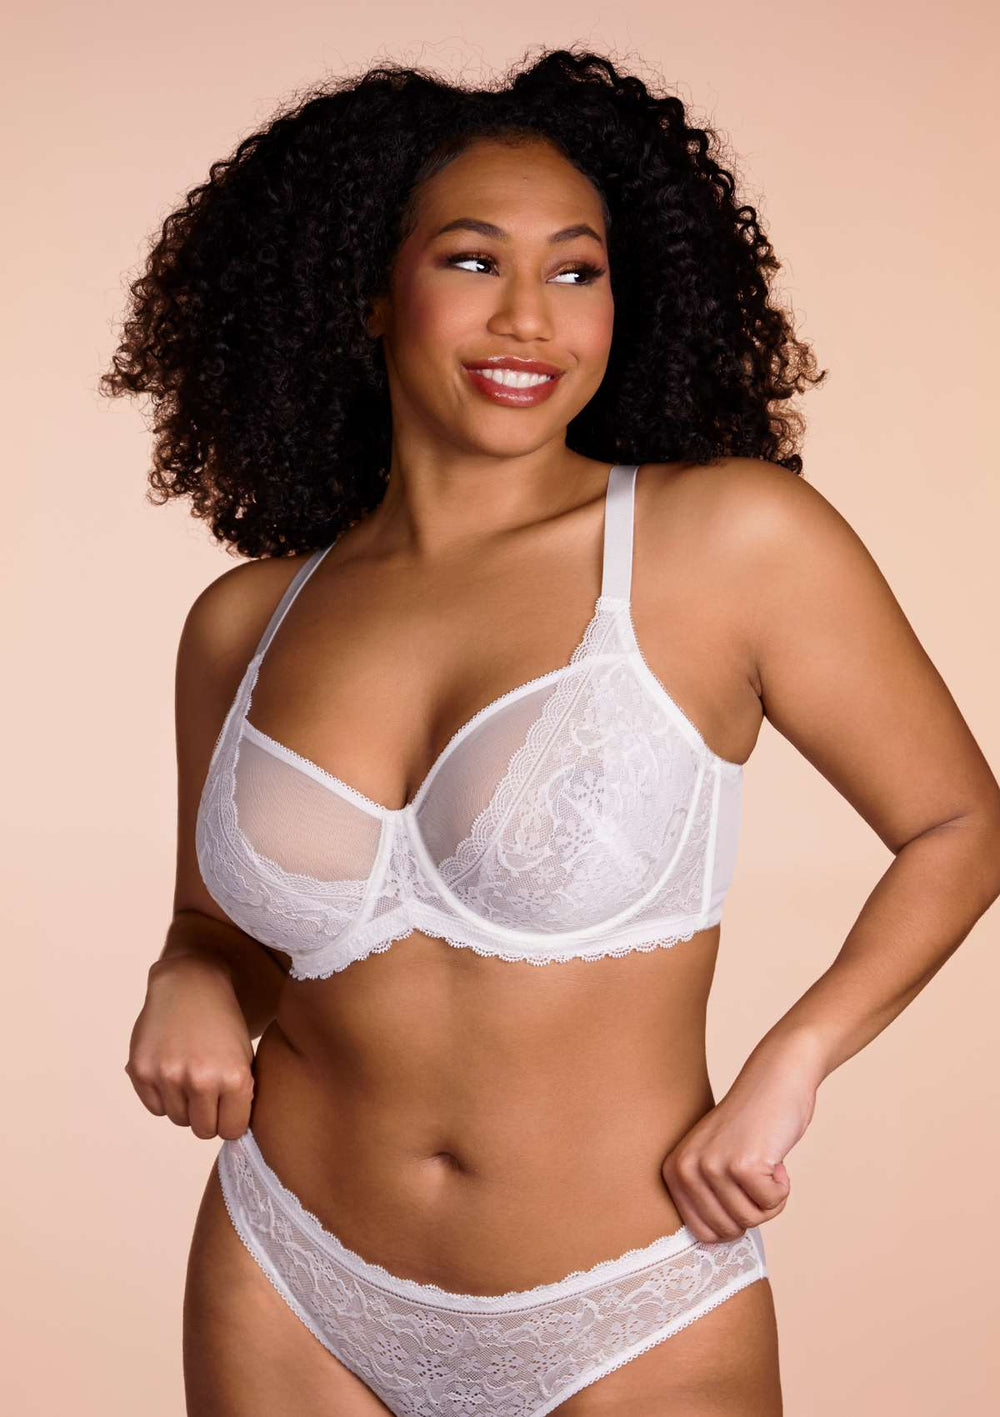 What Are The Best Bras for Big Boobs?, by Hsia Lingerie